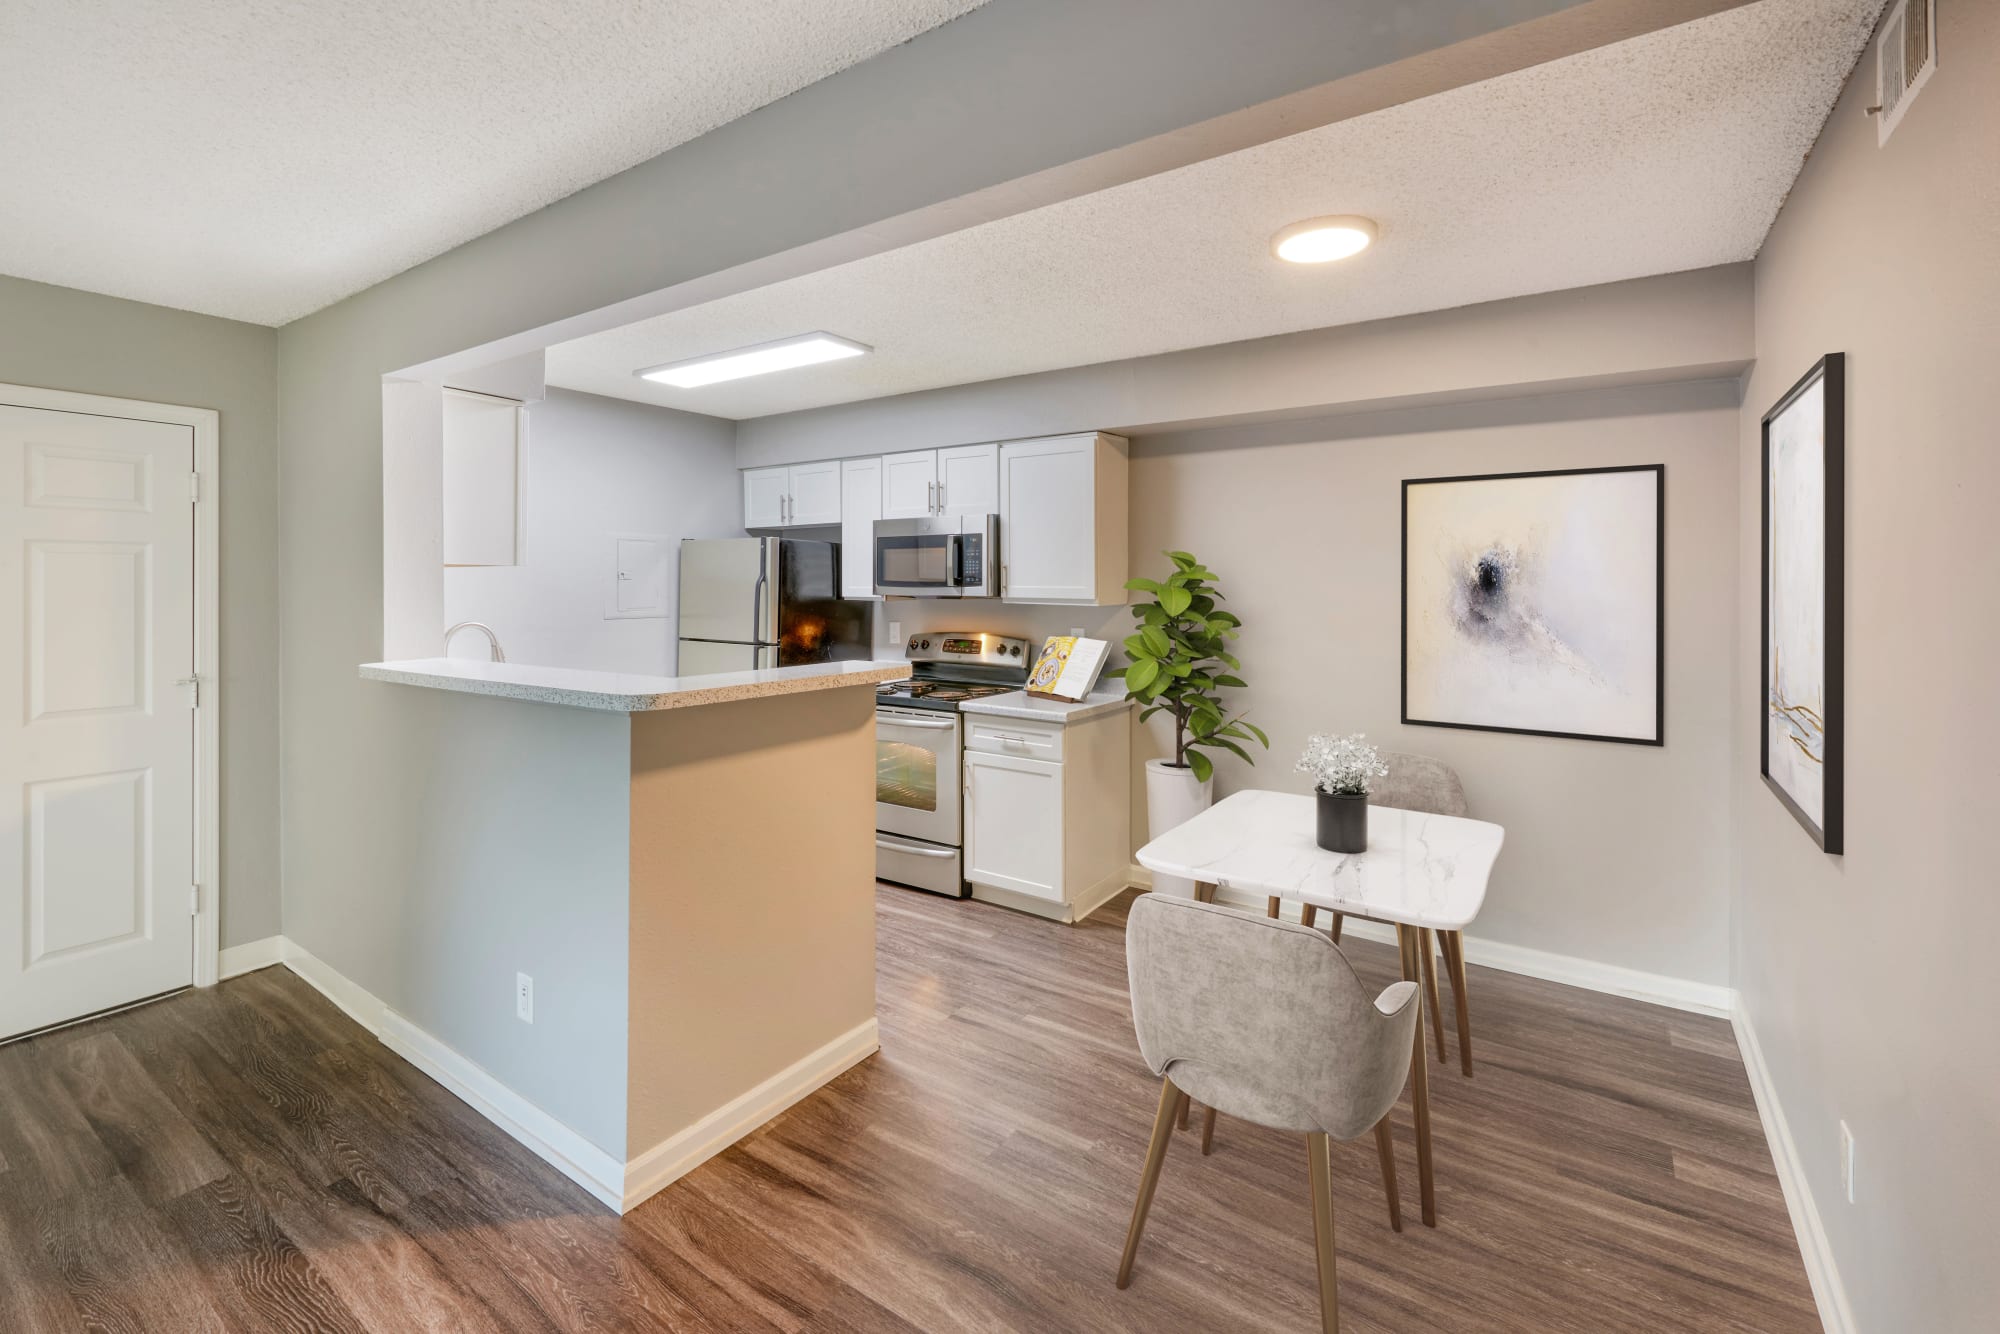 Modern white cabinets in kitchens at Alton Green Apartments in Denver, Colorado